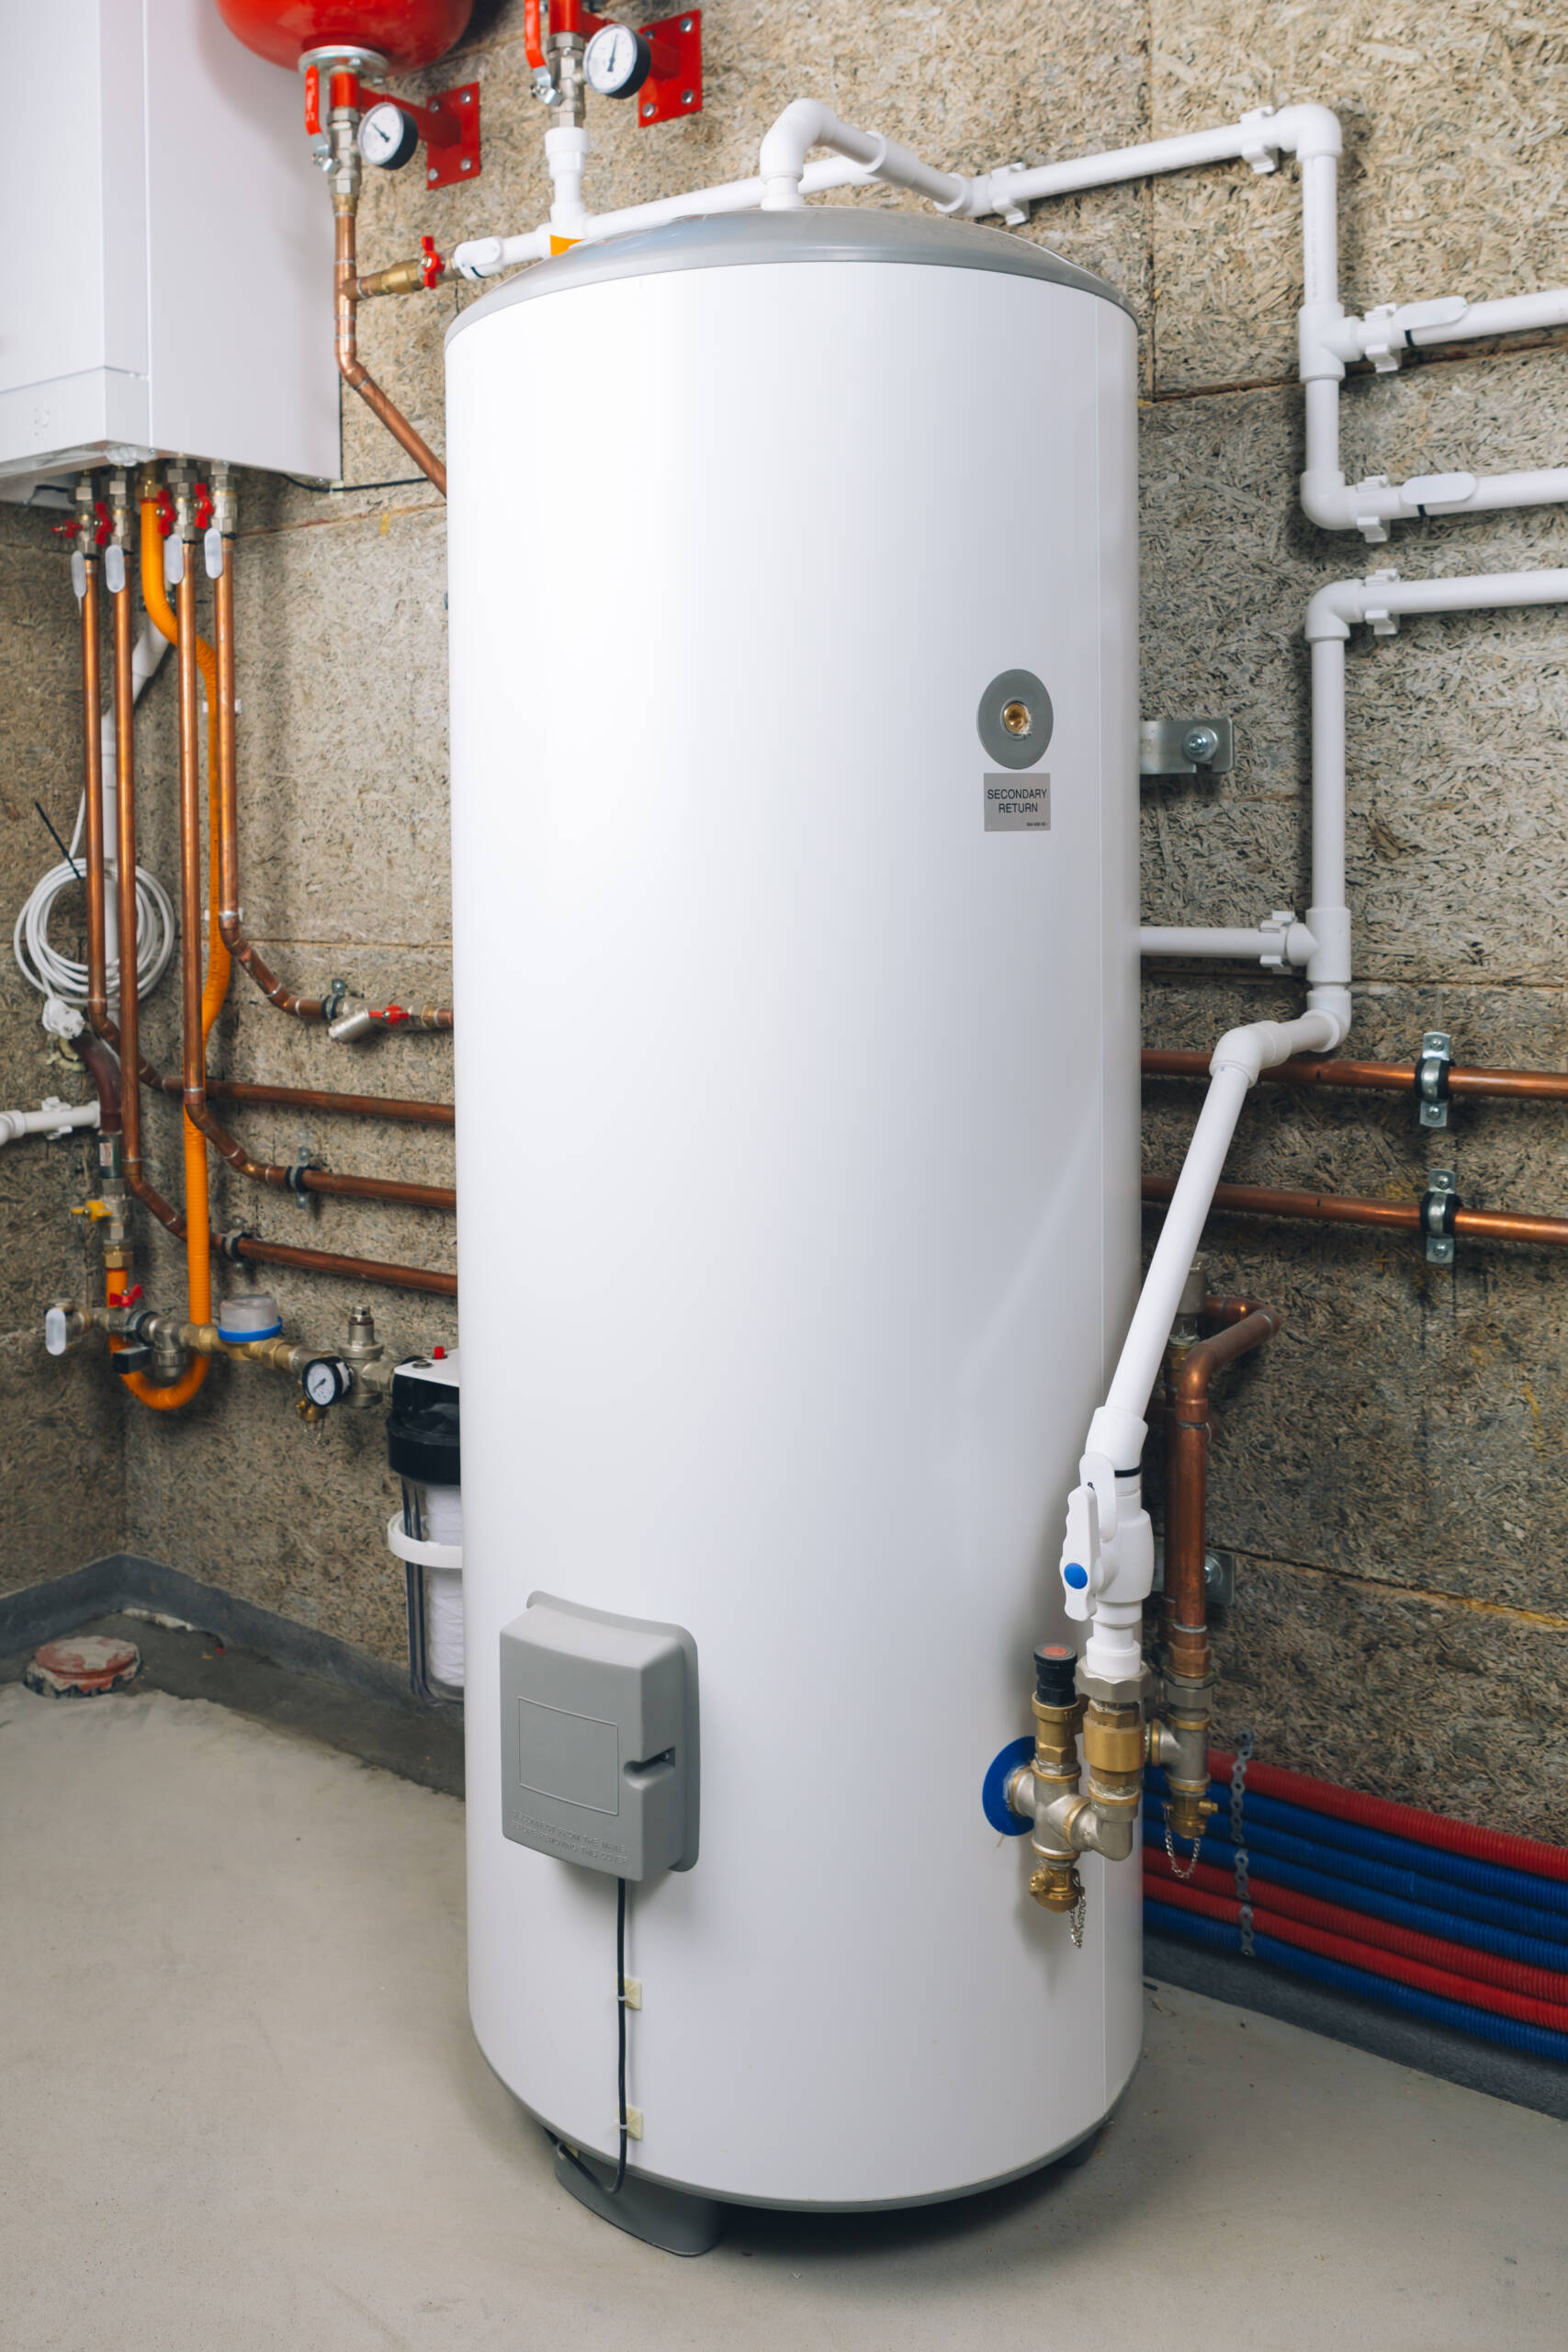 Photo of a white hot water tank